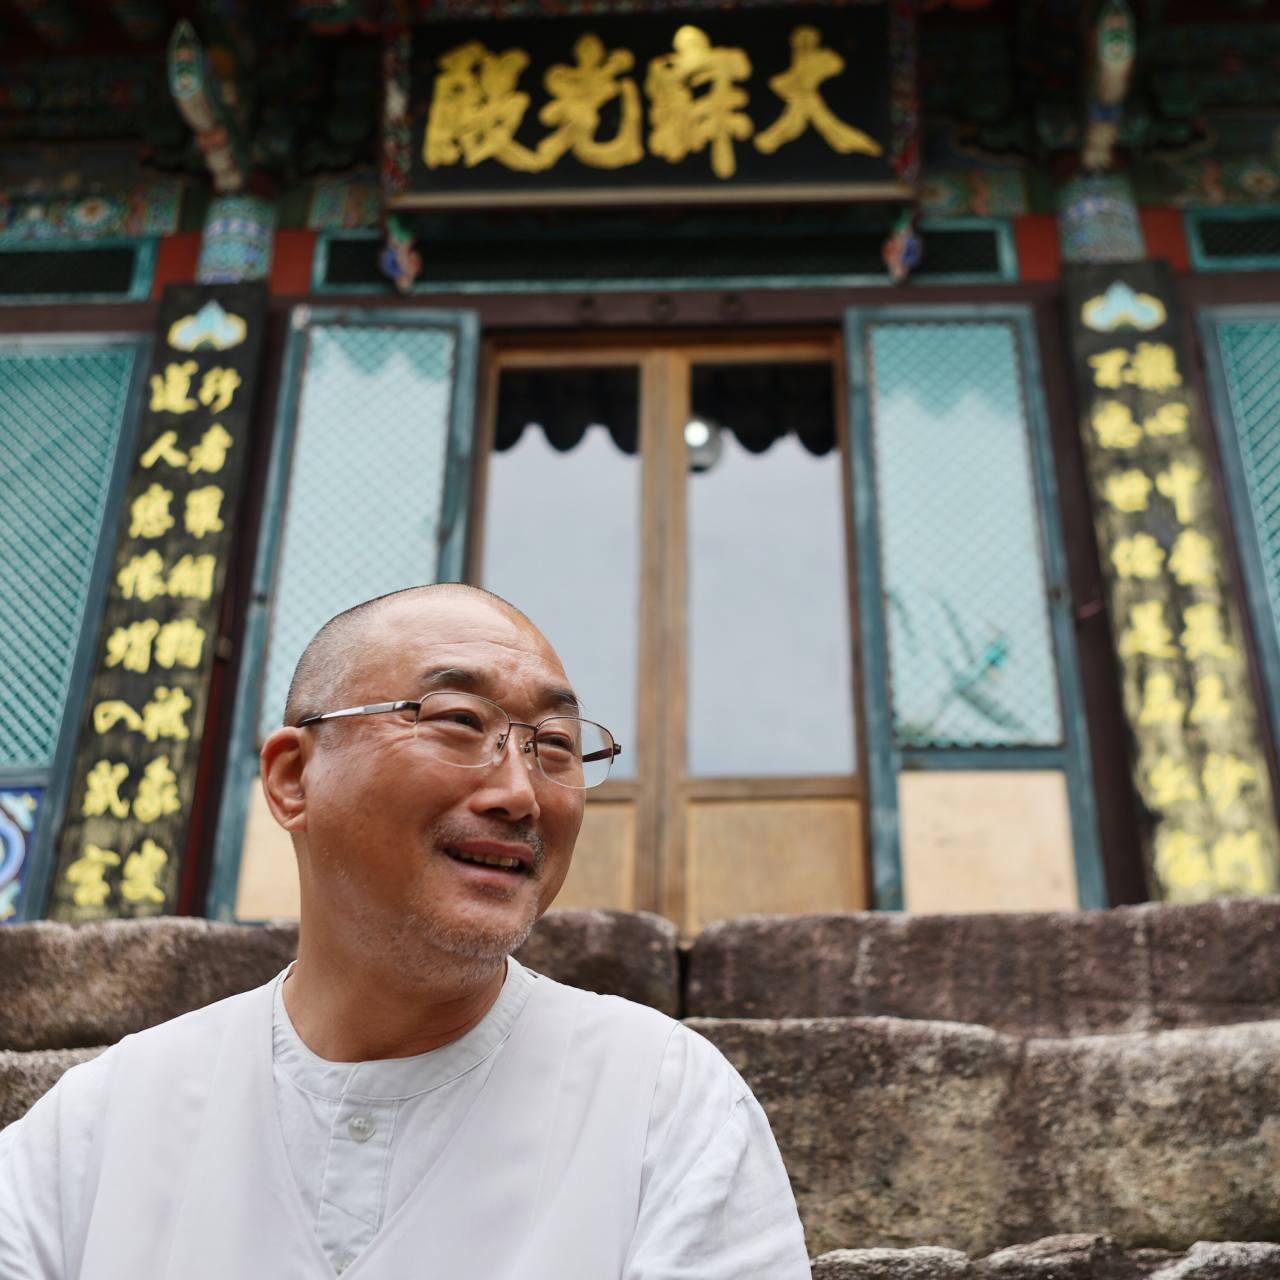 Ven. Jibong, the founder of Yeongcheon History Museum, speaks about Minganinswaejobo, the world’s first commercial newspaper, at Yonghwasa temple in Yeongcheon, North Gyeongsang Province.Photo © 2020 Hyungwon Kang